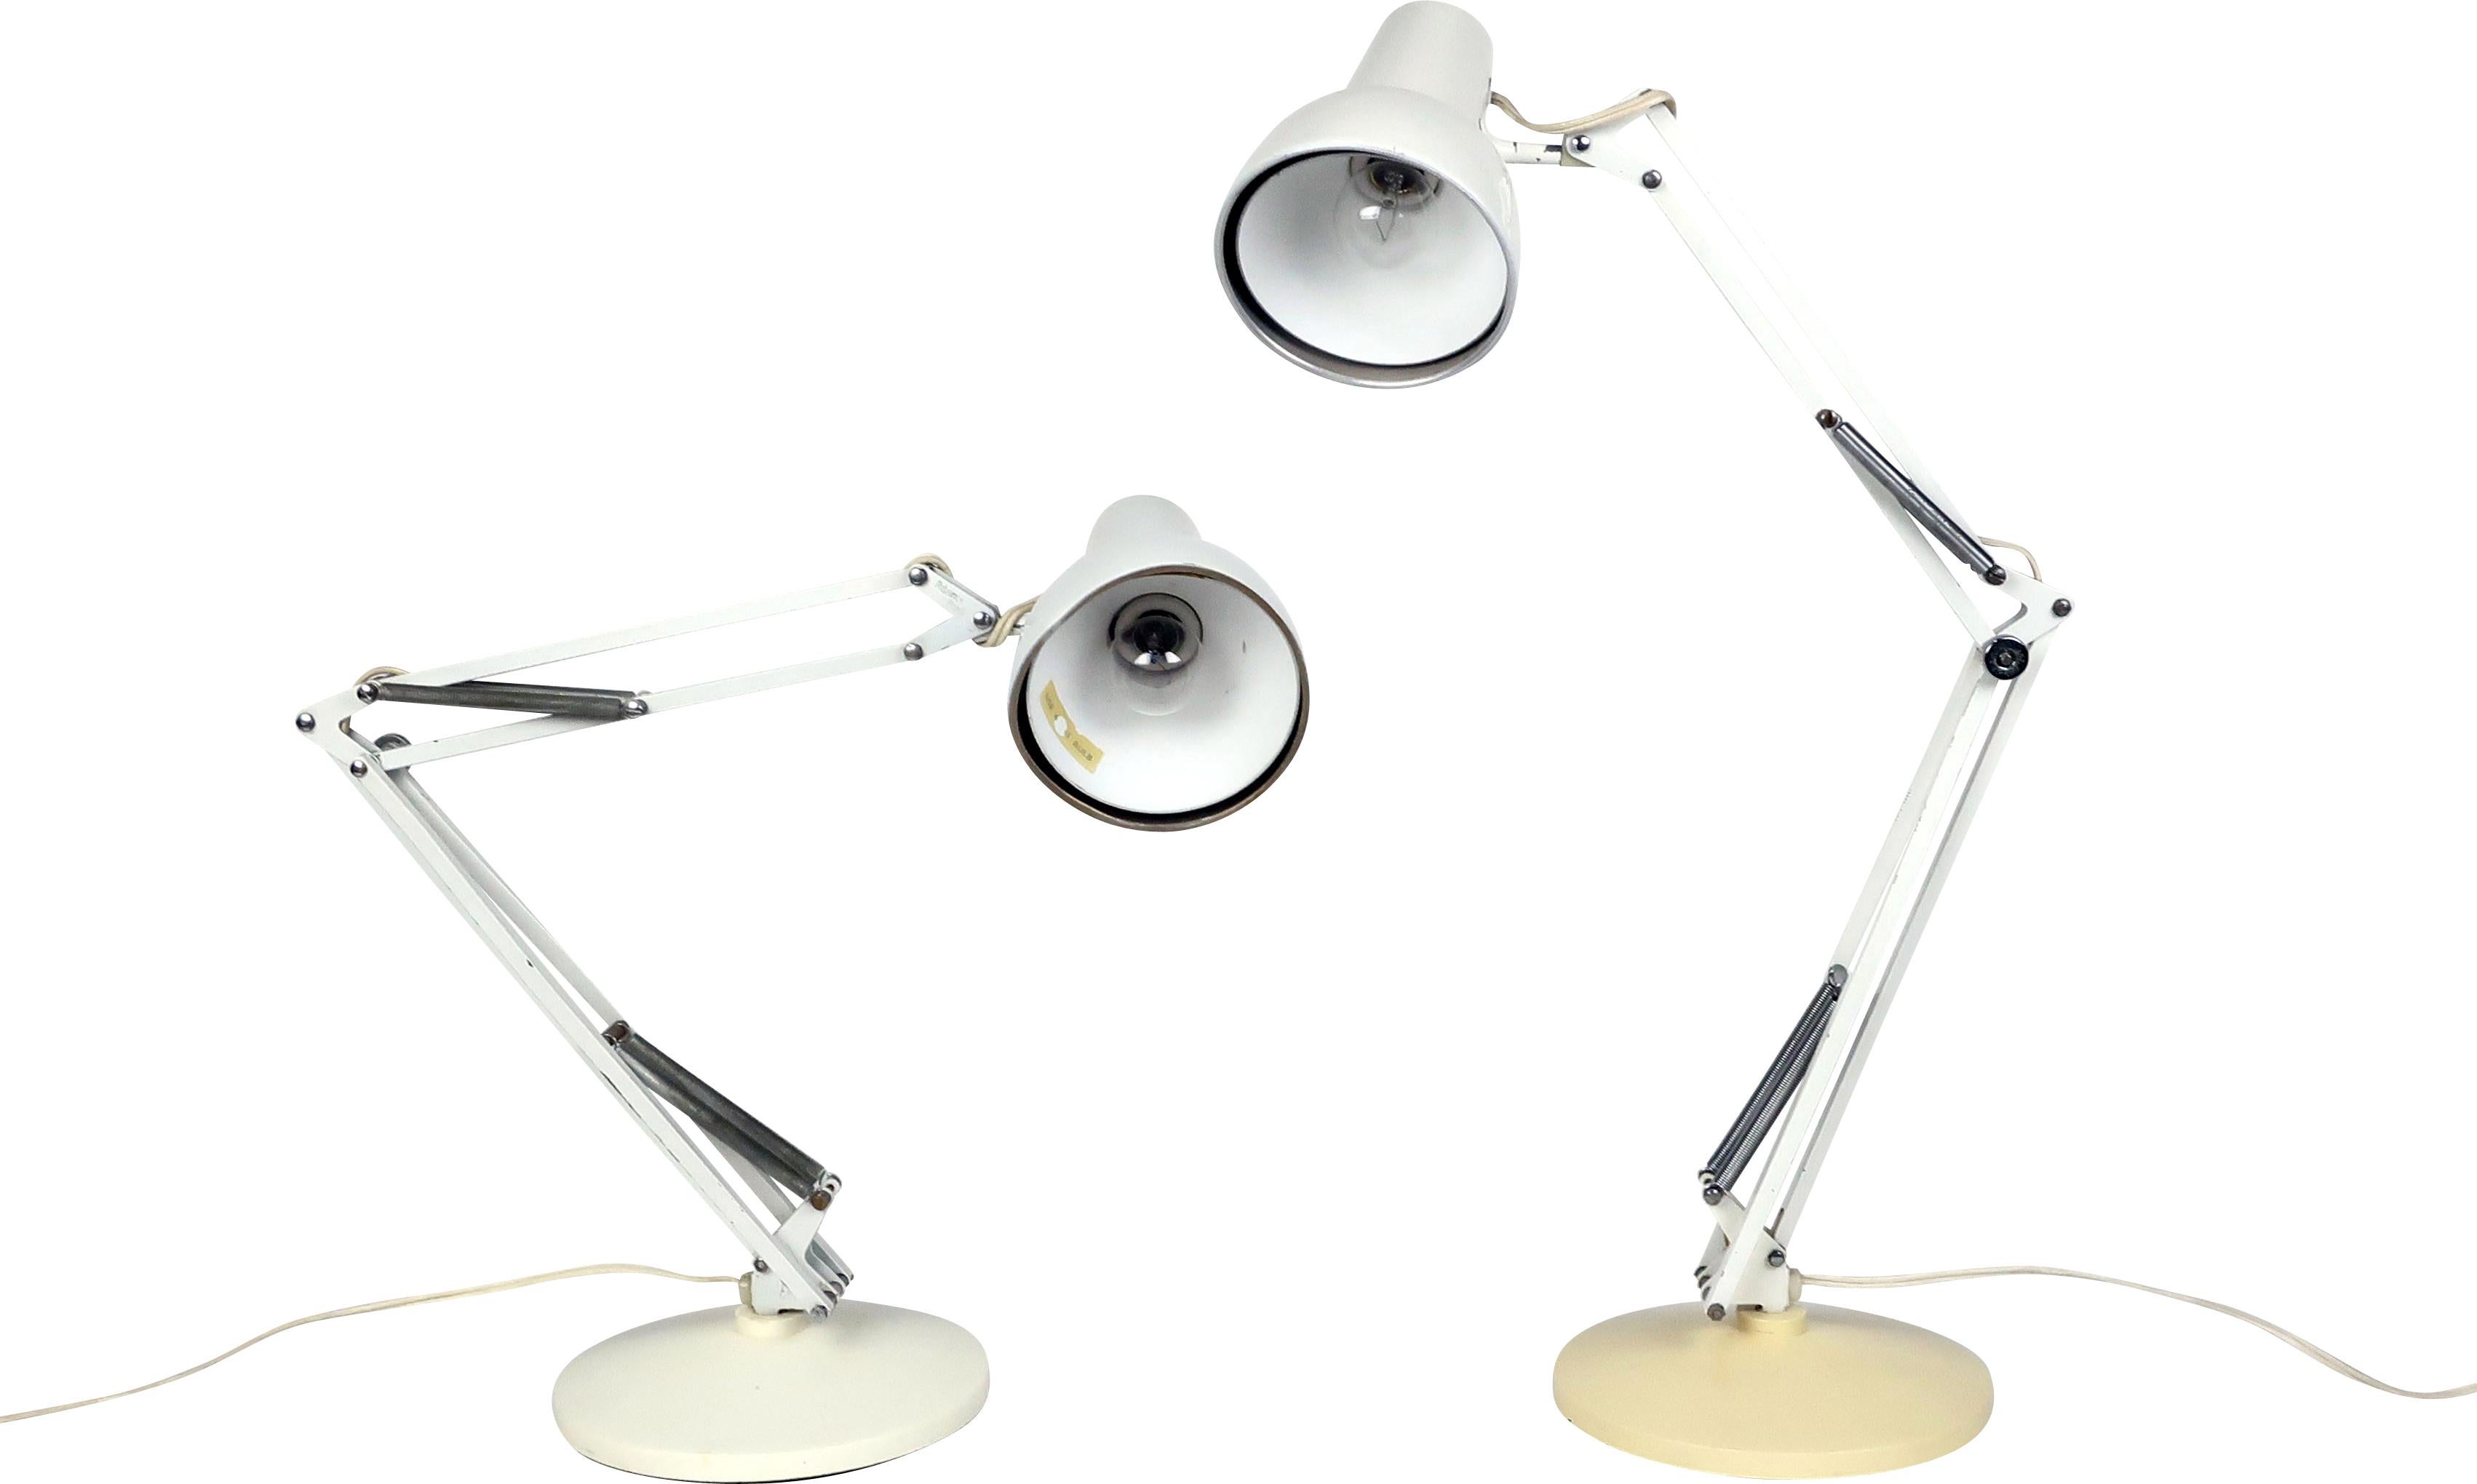 A pair of off-white Luxo desk lamps, one with a cream base and one with an off-white base. This design is similar to the Luxo L-1 lamp, which was the inspiration for the iconic Pixar animated short 